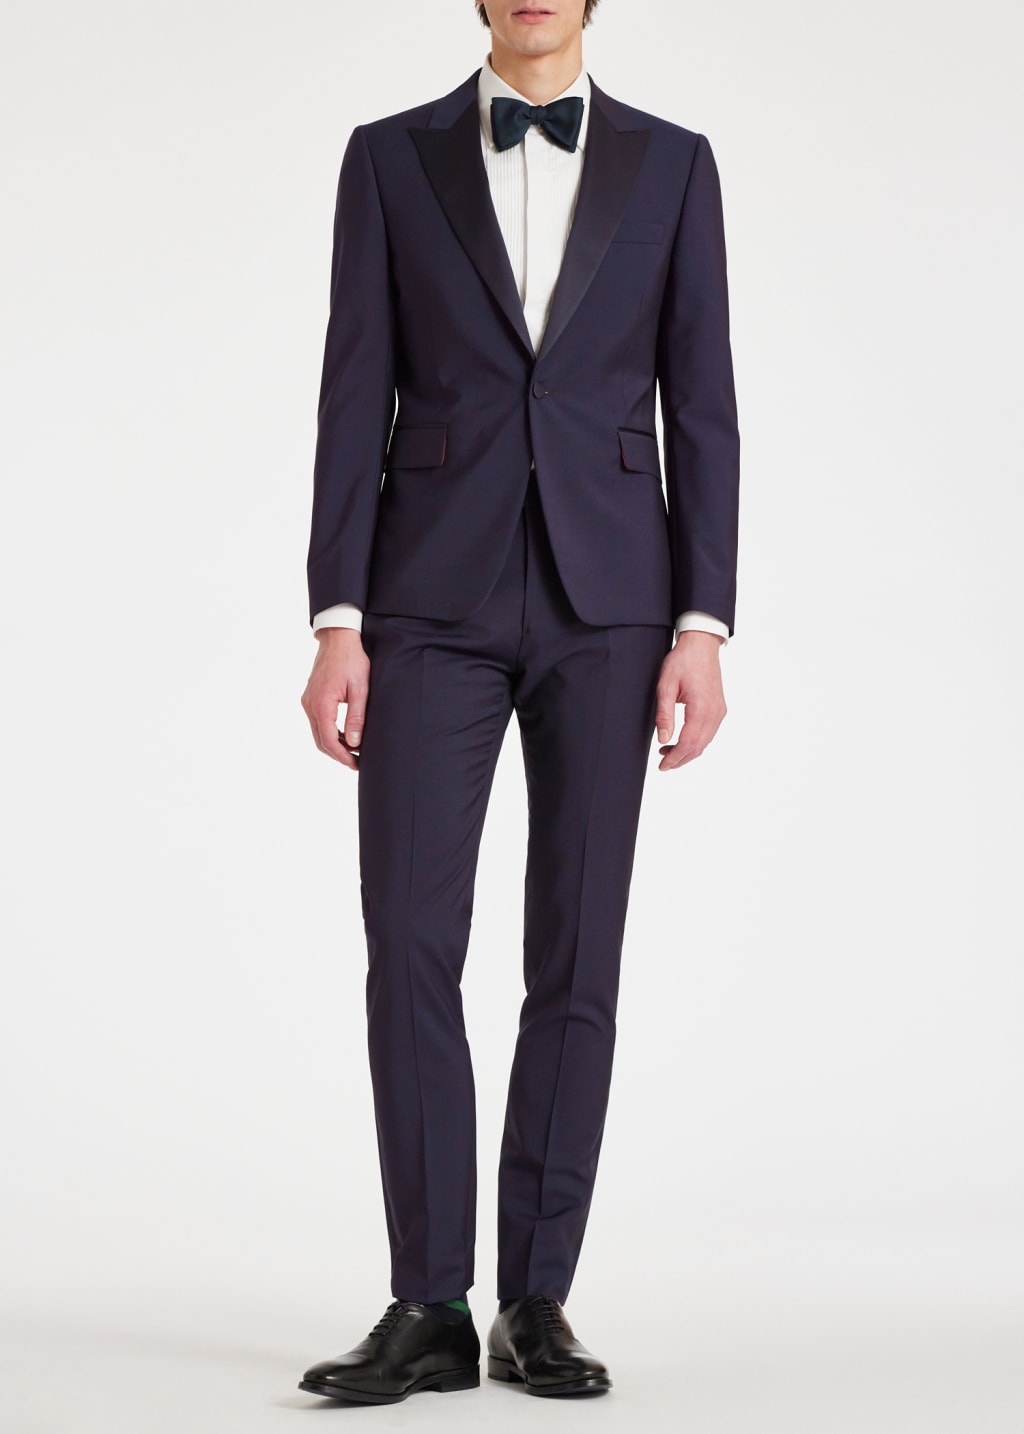 Model View - The Soho - Tailored-Fit Dark Blue Wool-Mohair Evening Suit Paul Smith